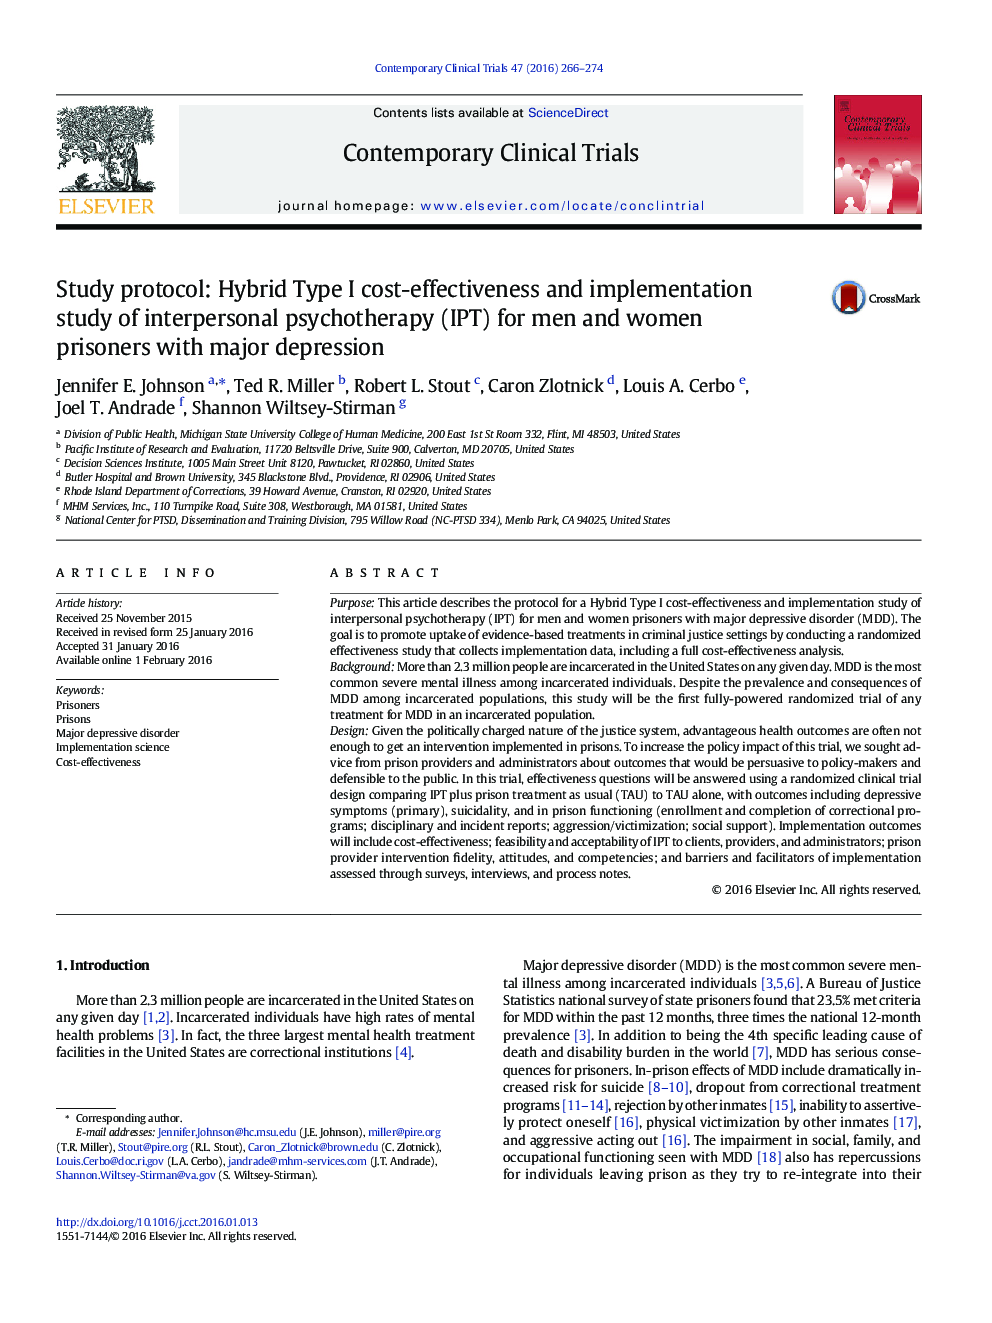 Study protocol: Hybrid Type I cost-effectiveness and implementation study of interpersonal psychotherapy (IPT) for men and women prisoners with major depression